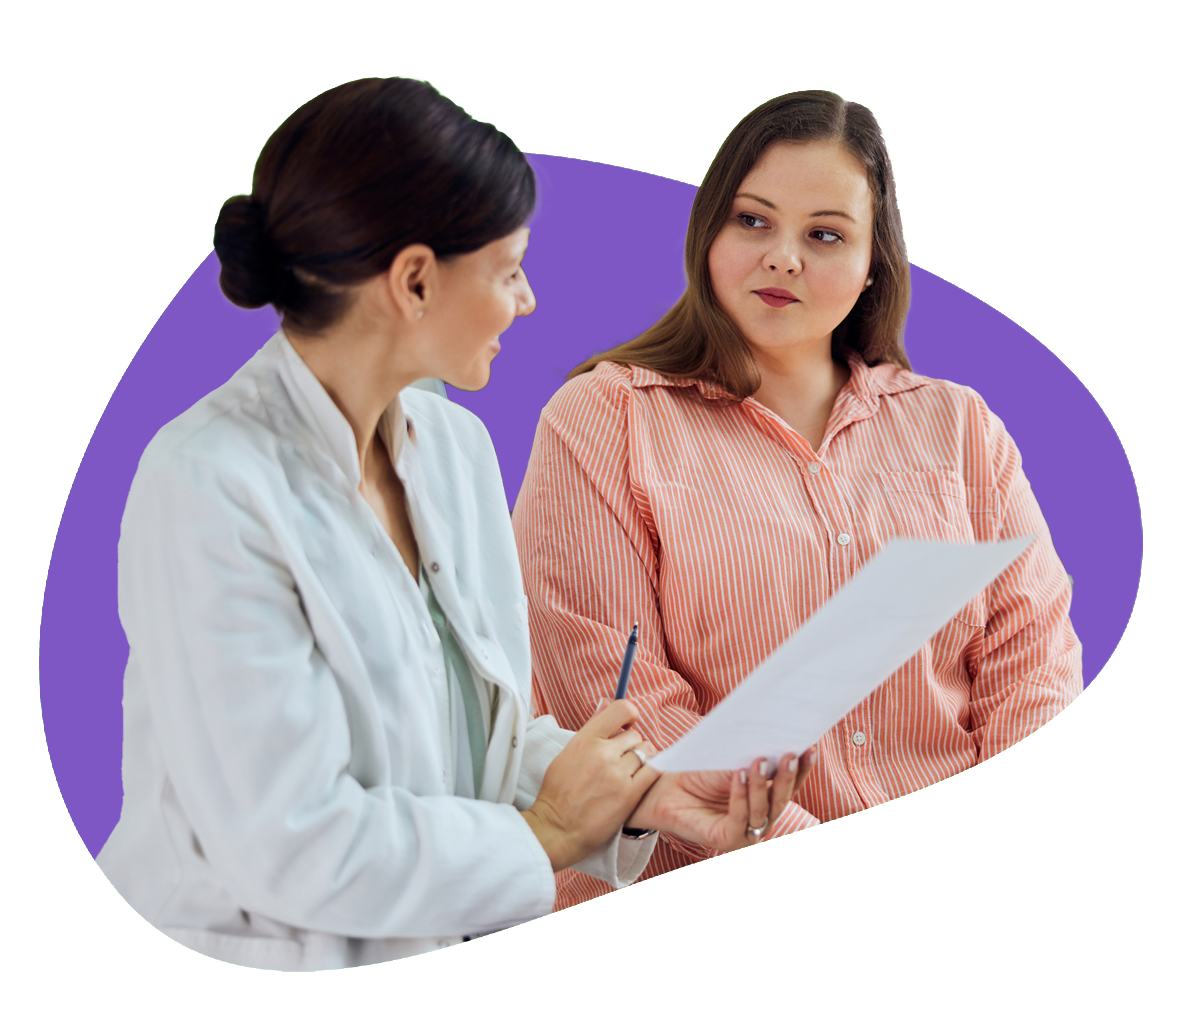 Patient looks at their Dietitian, who is holding a piece of paper and pen as they discuss their nutritional health plan.